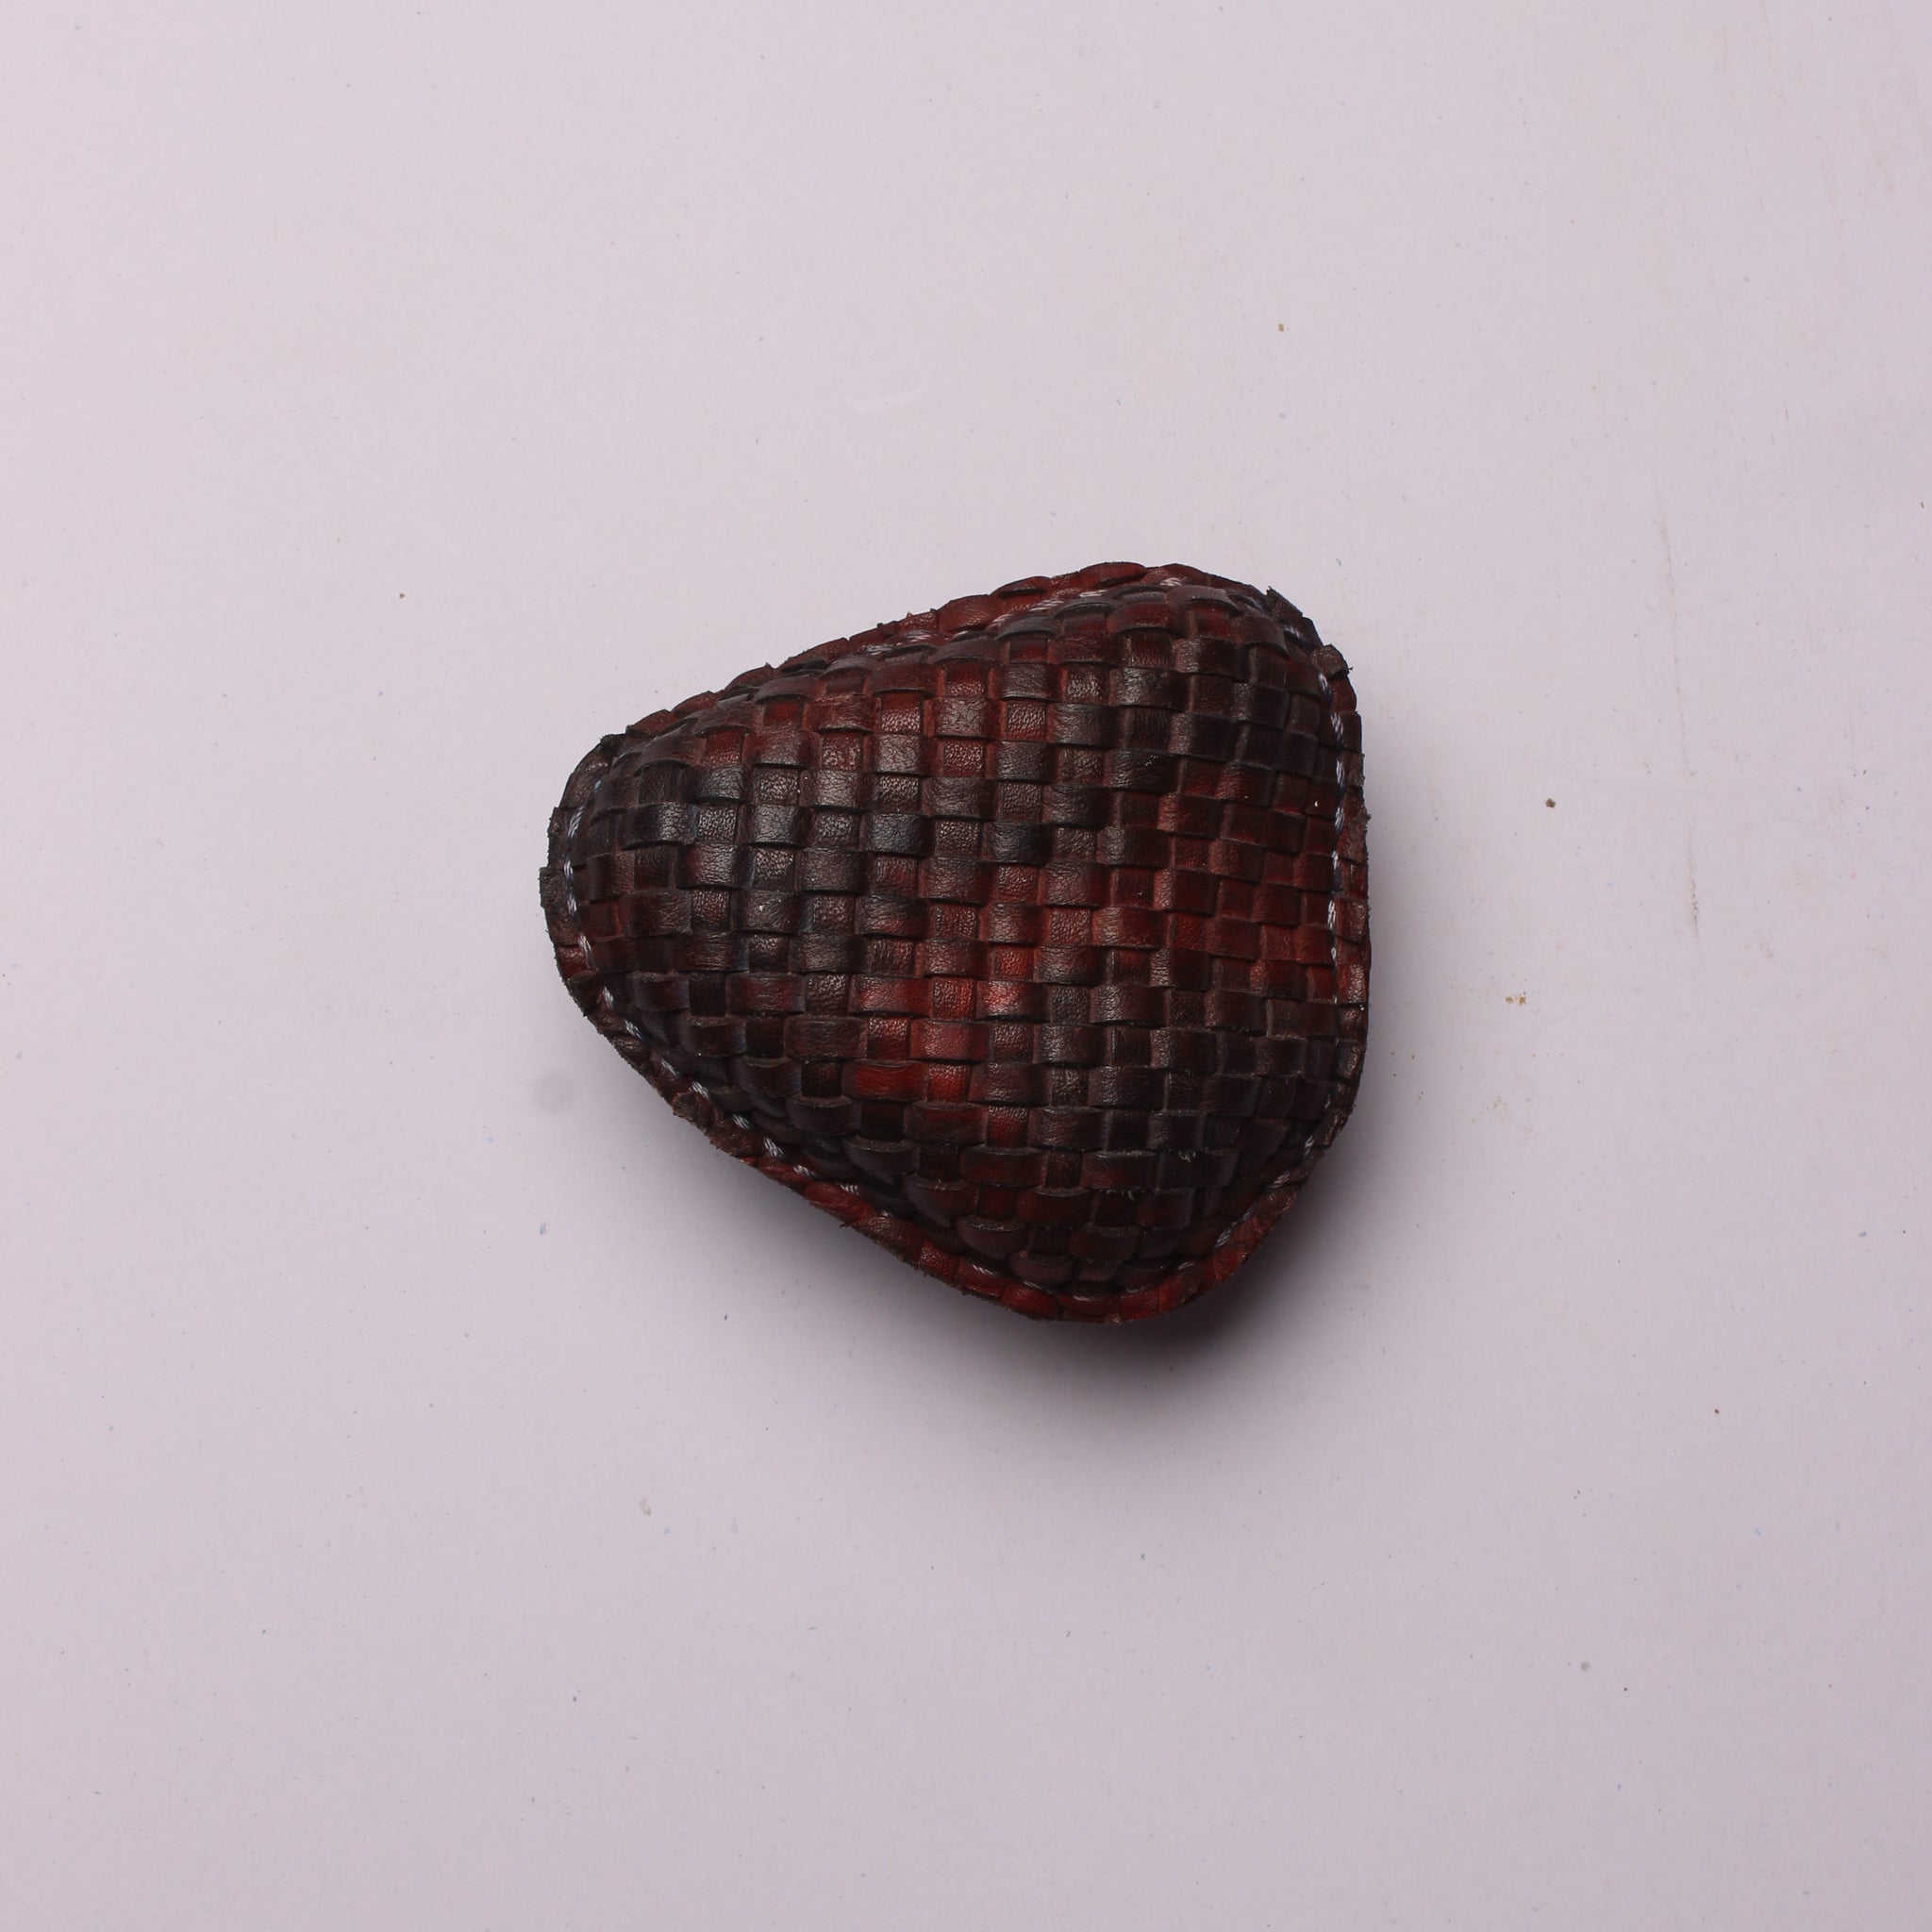 Woven Elegance: Leather Crafted Paperweight